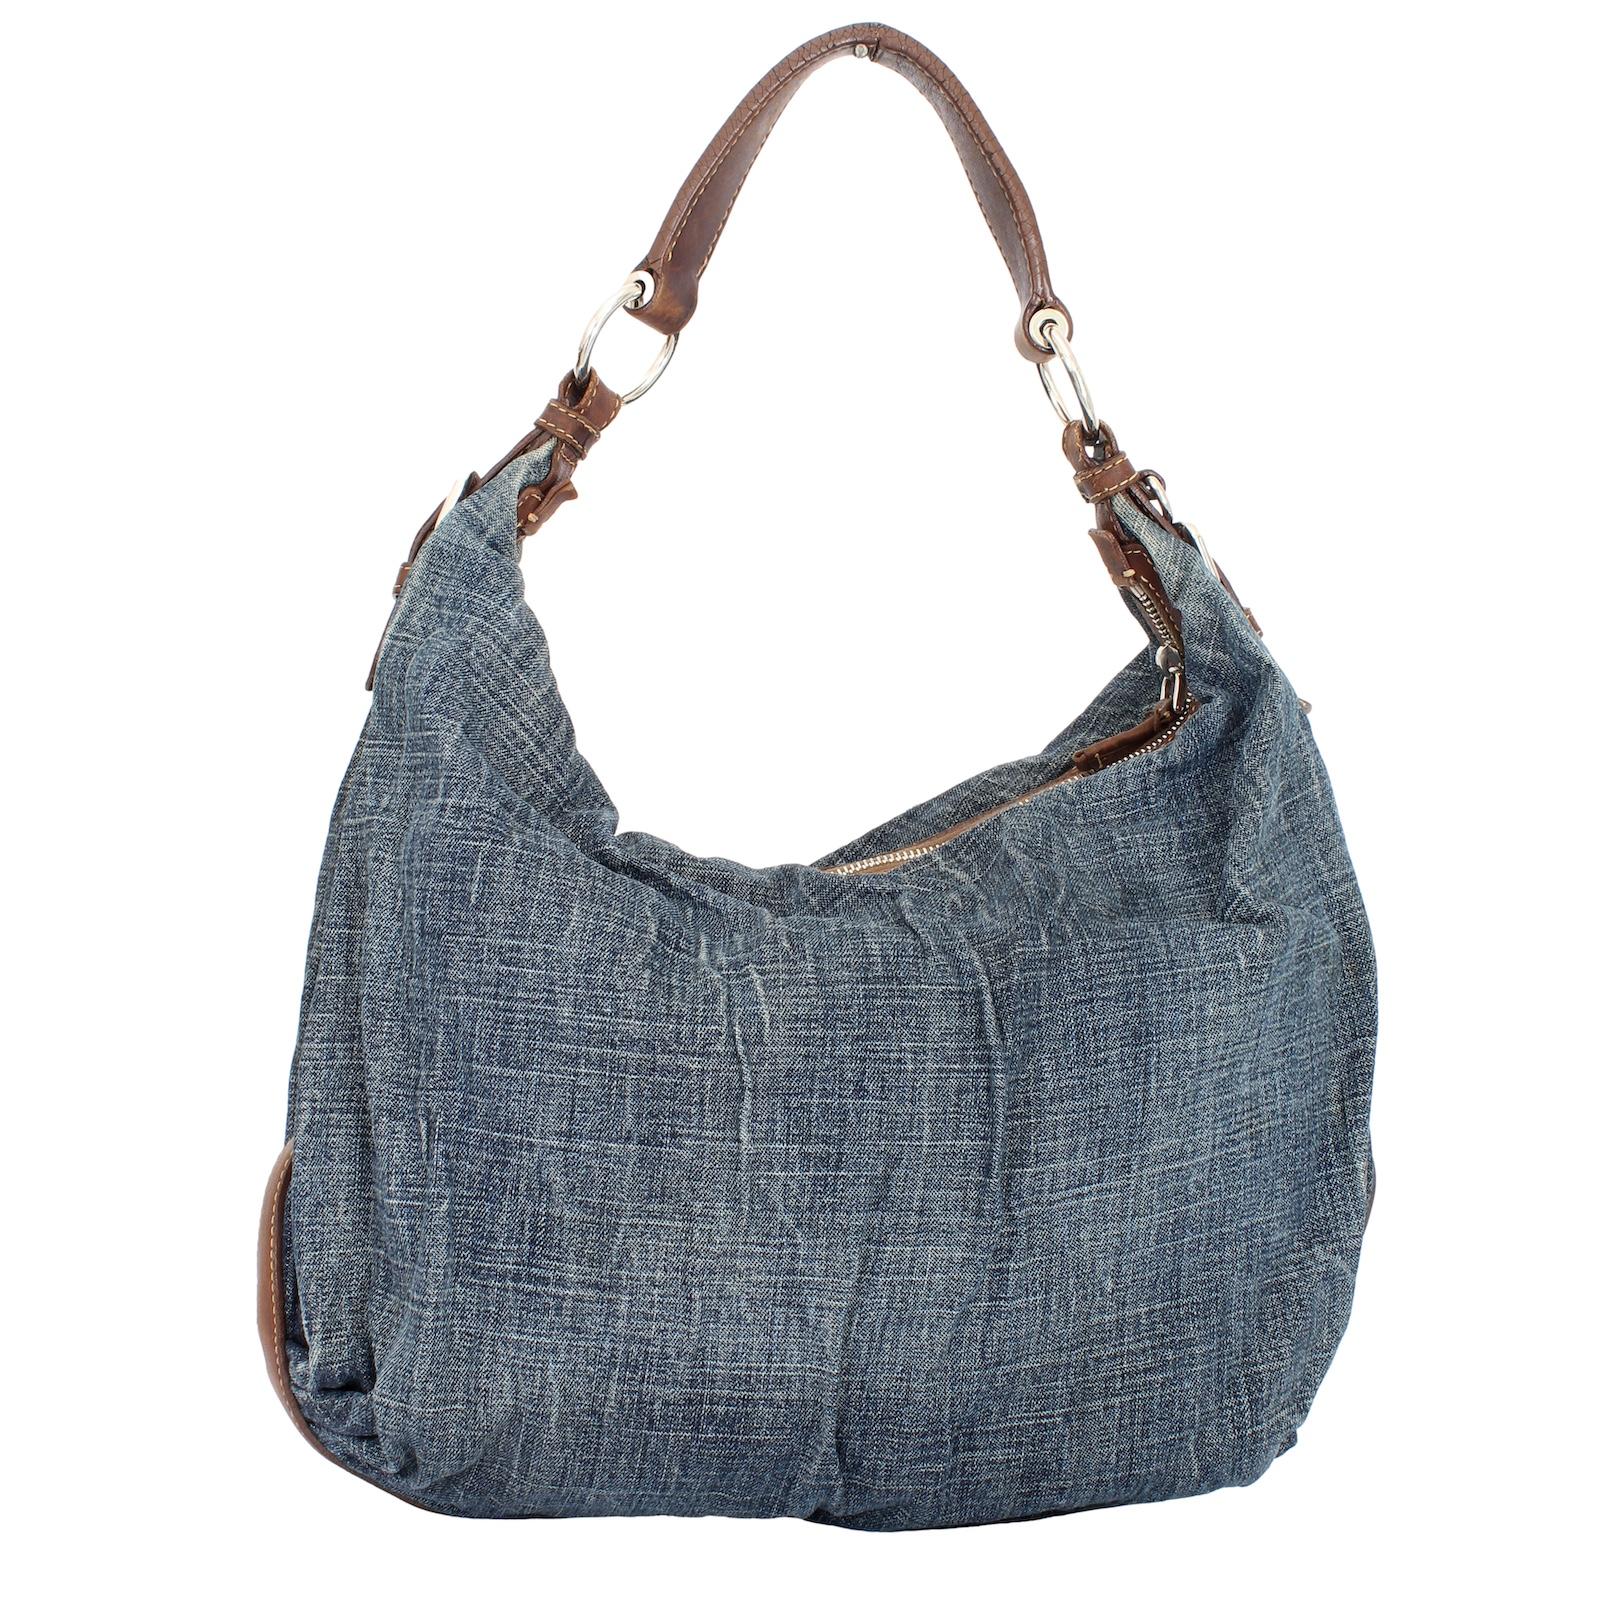 Prada 90s vintage denim hobo bag. Blue color, finished with brown leather details and silver-colored hardware. Zip closure, internally lined with logo and pocket. The logo on the front is embroidered in blue cord. Made in Italy. The general